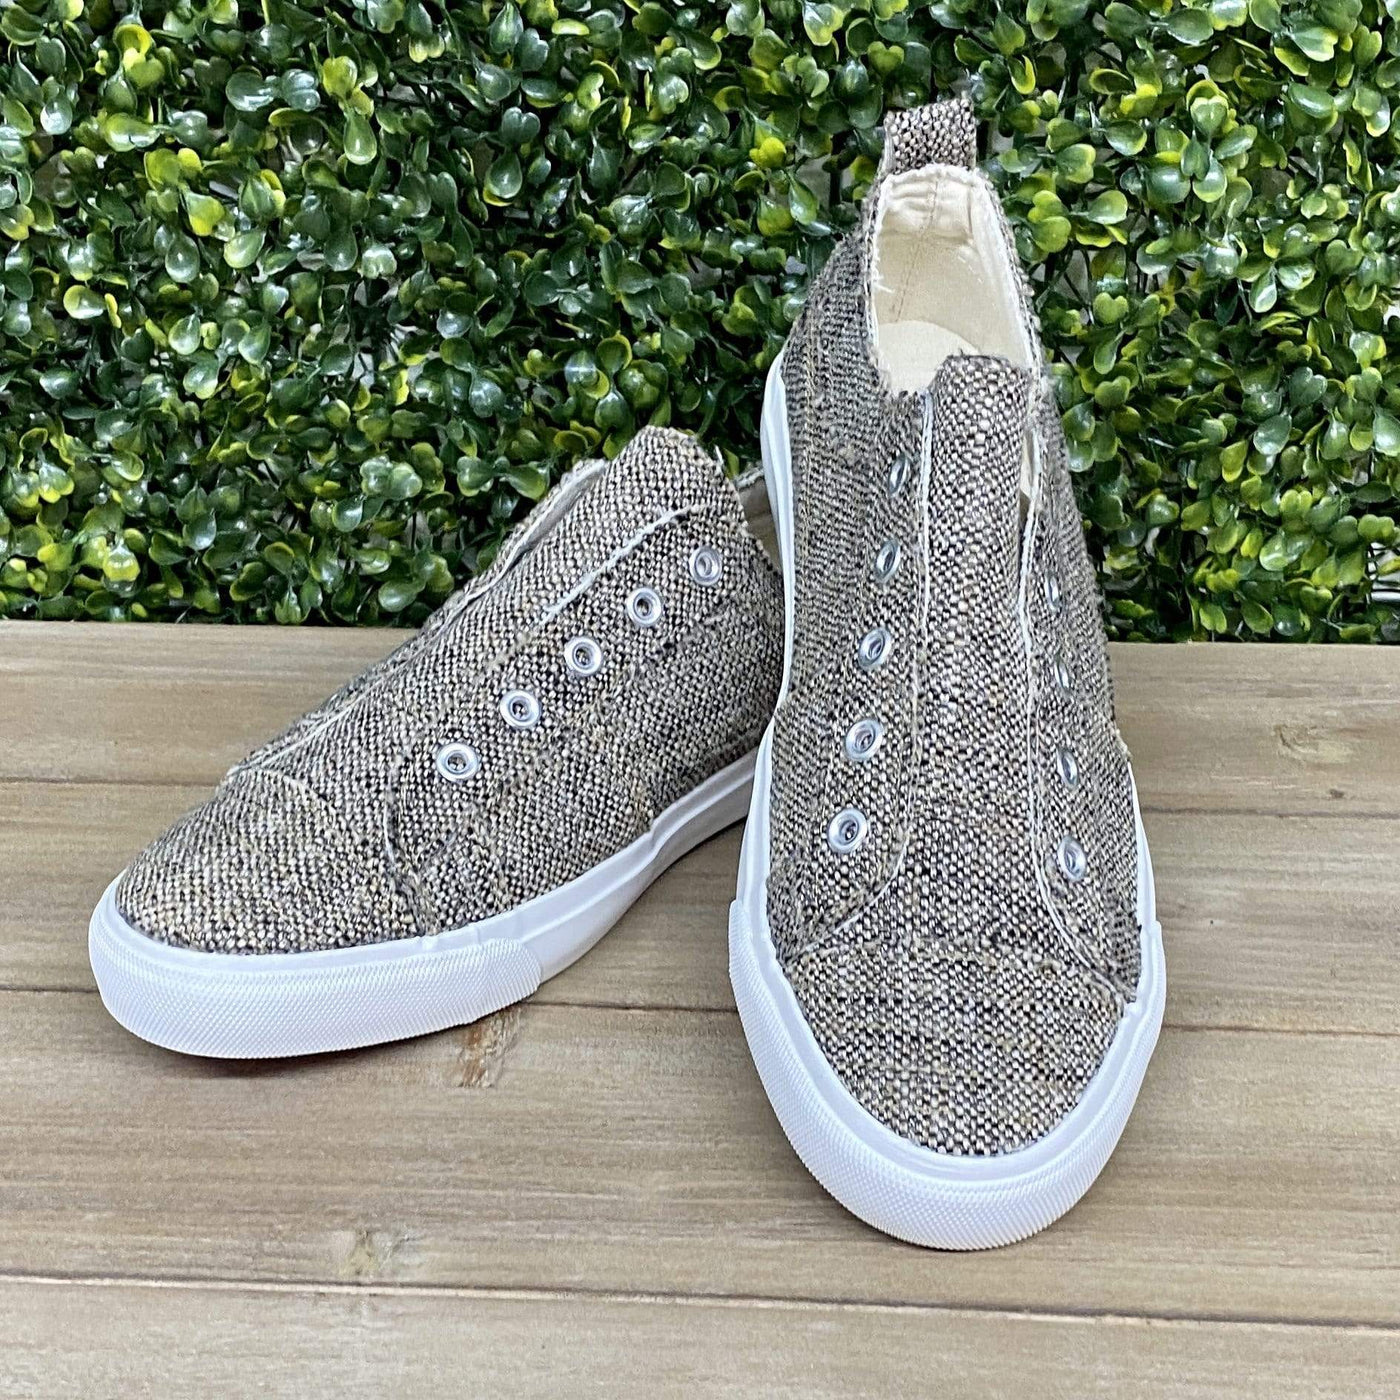 Babalu Tweed Slip on Shoes Shabby Chic Boutique and Tanning Salon